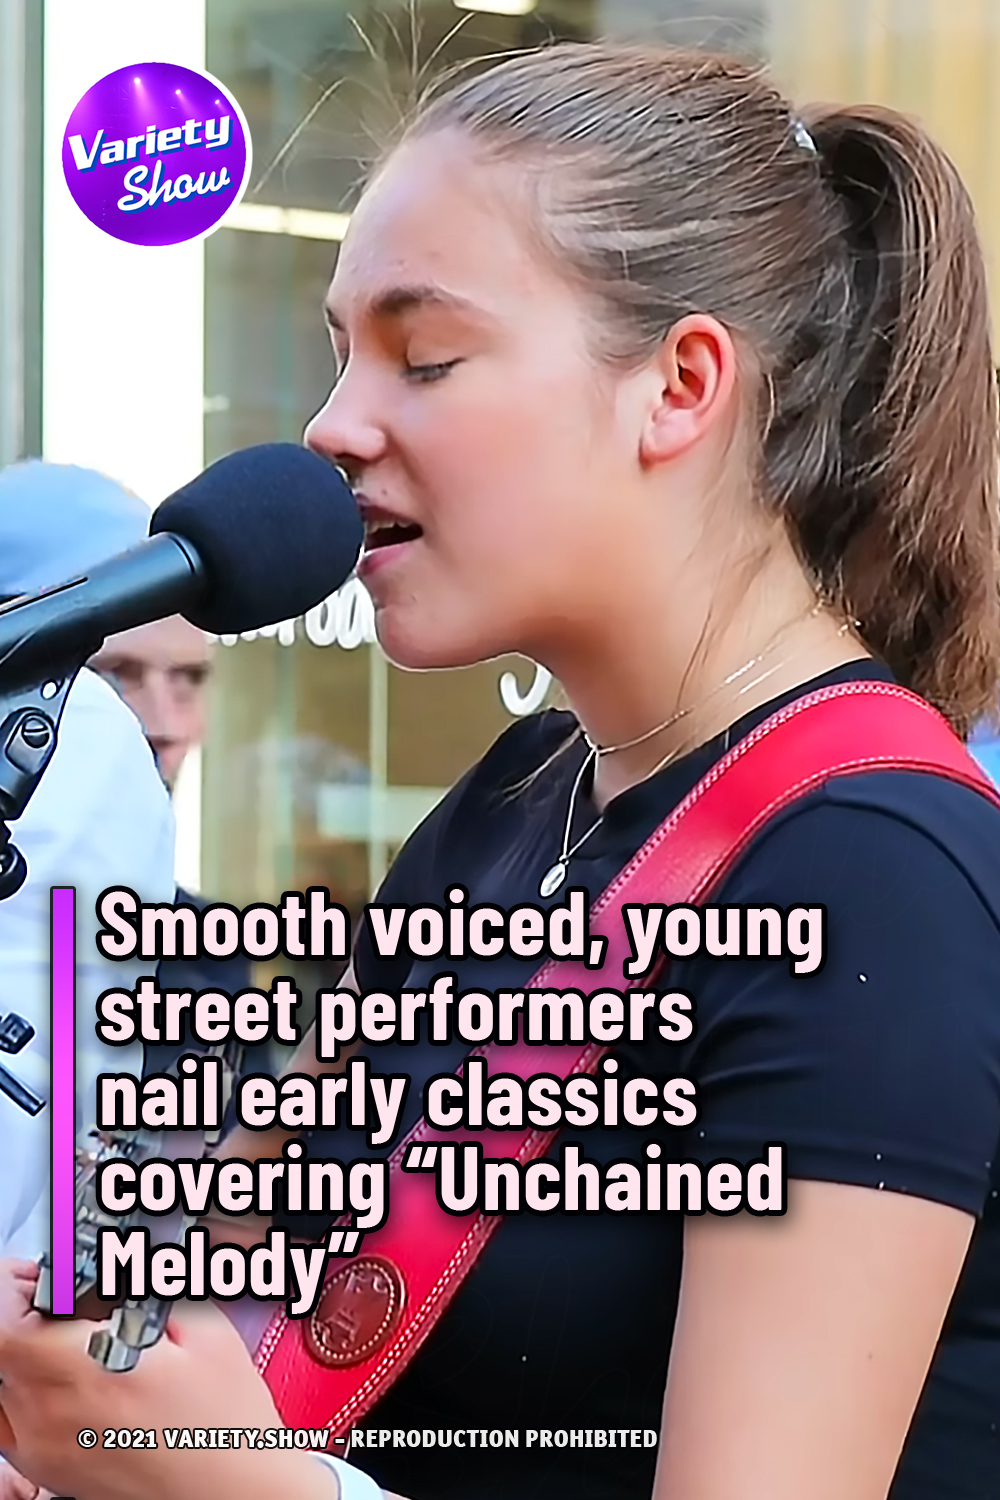 Smooth voiced, young street performers nail early classics covering “Unchained Melody”